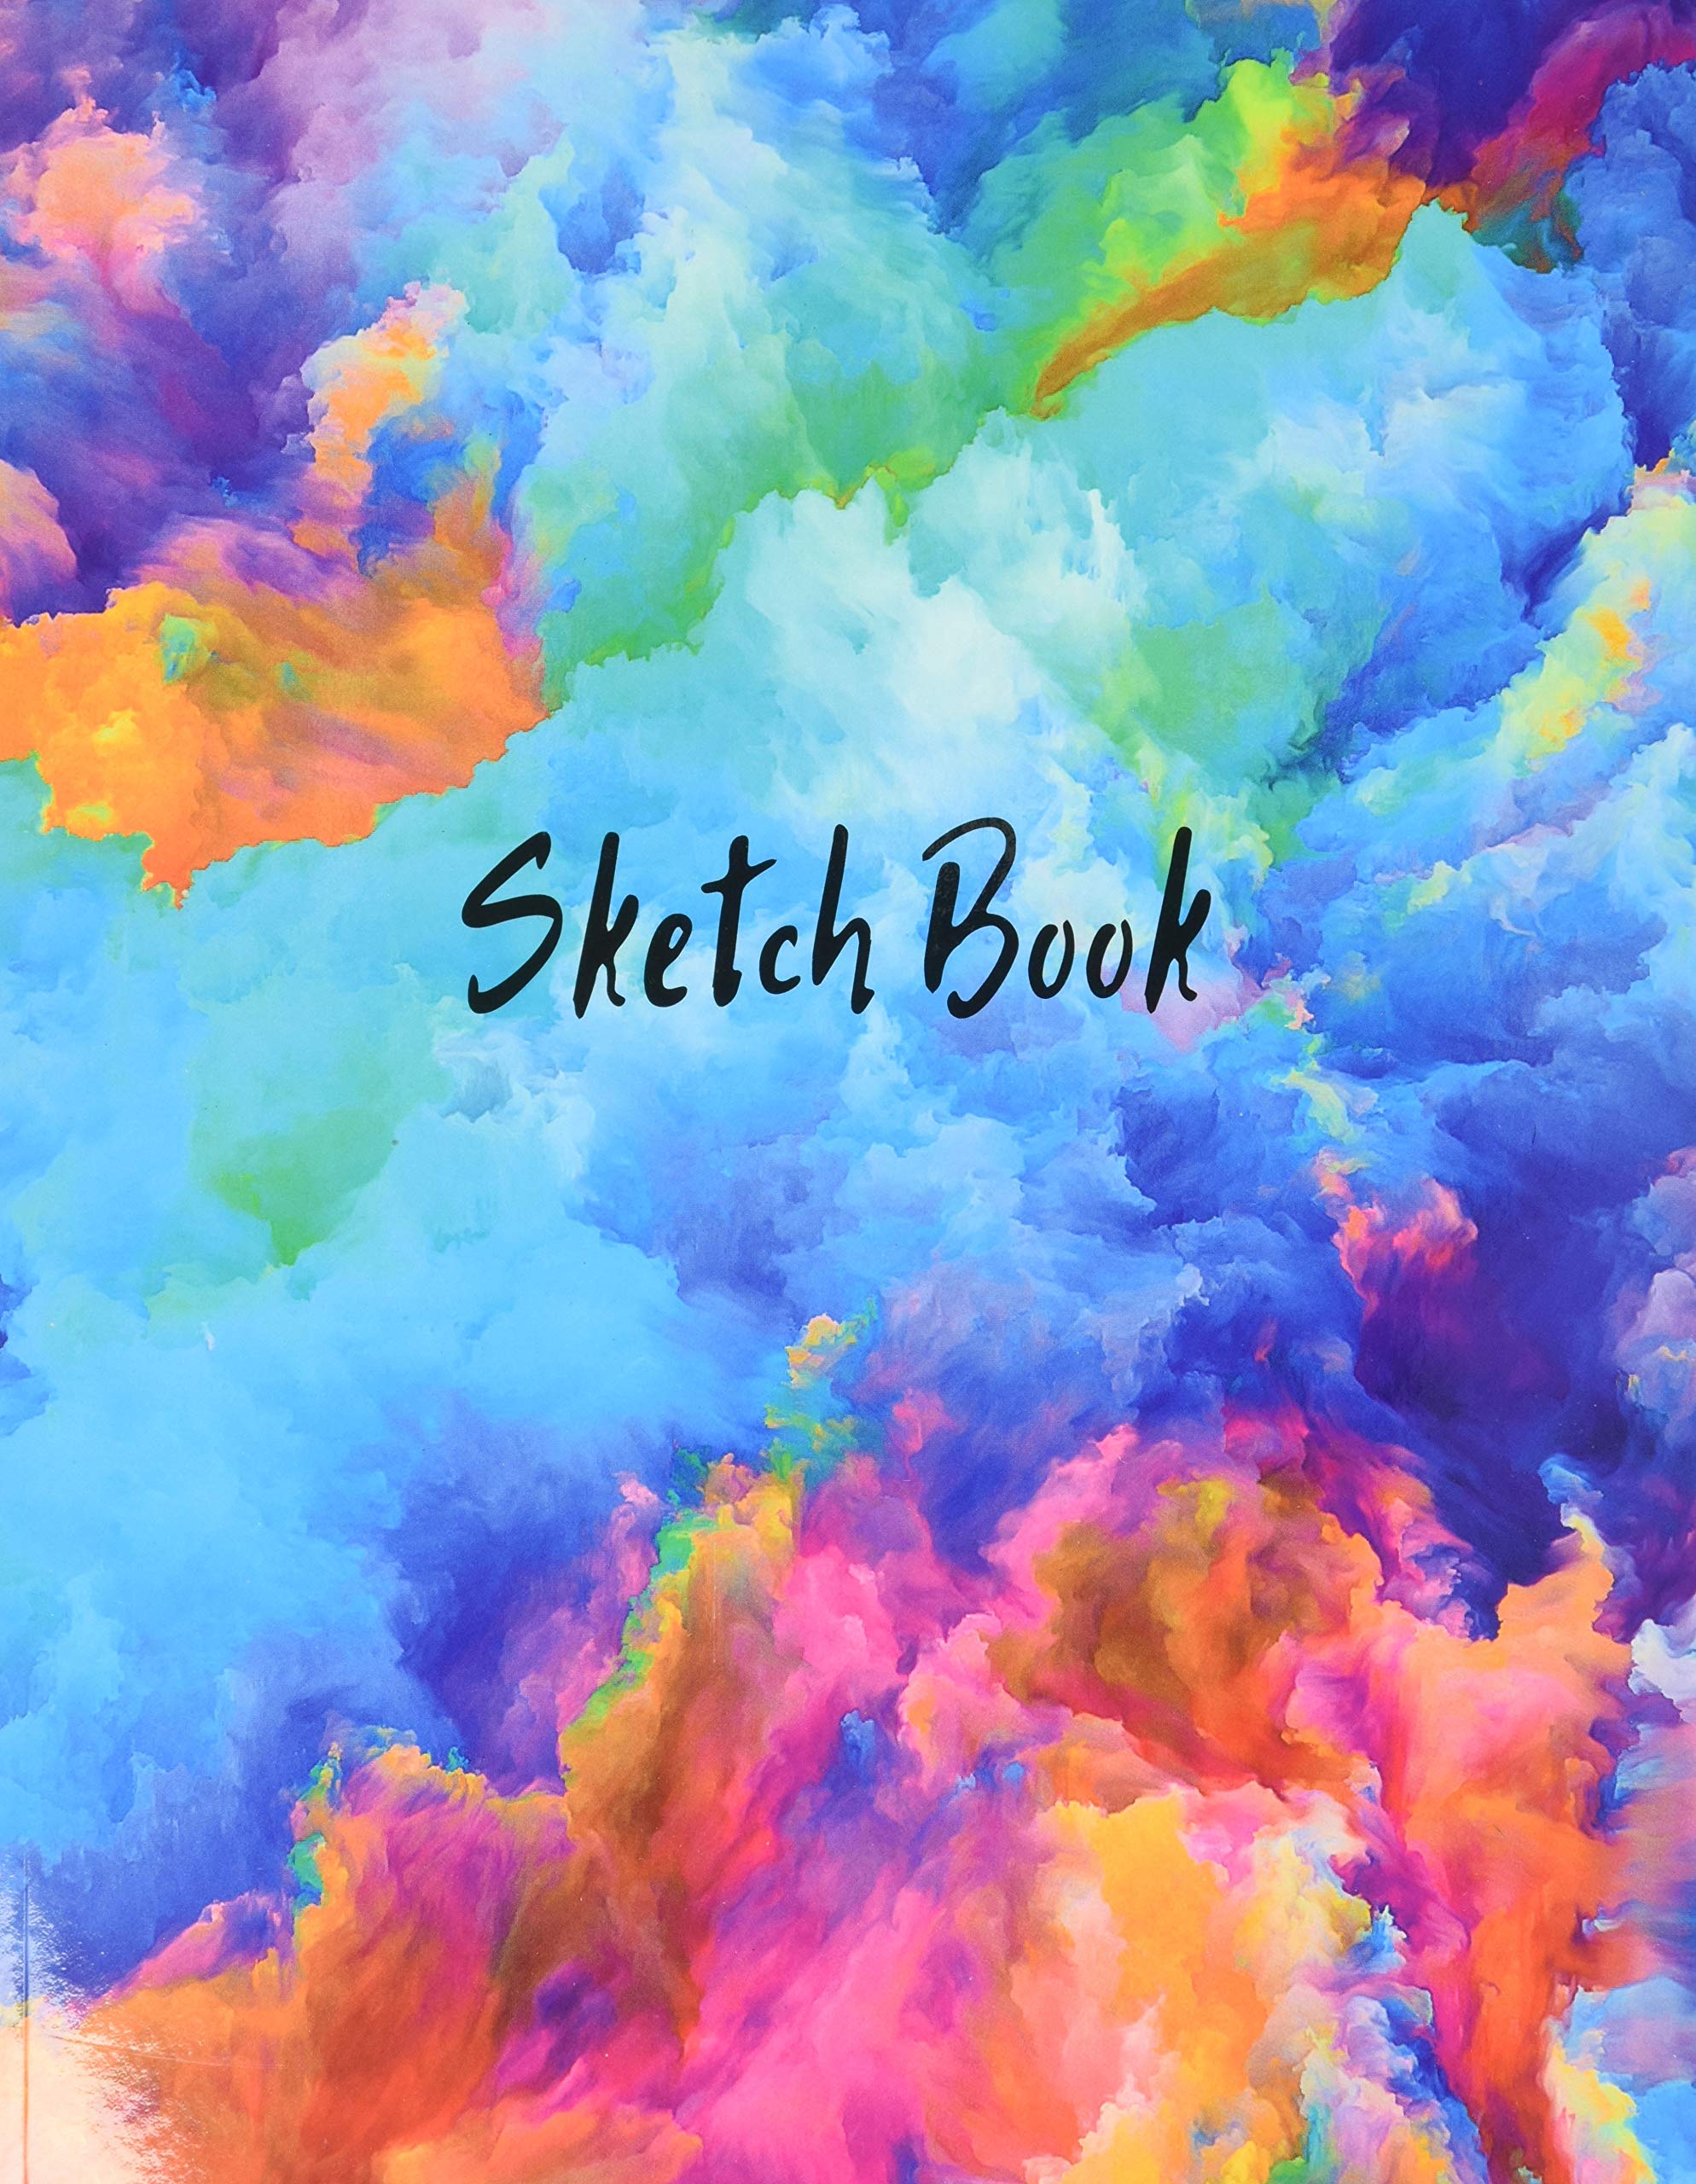 Notebook for Drawing, Writing, Painting, Sketching or Doodling